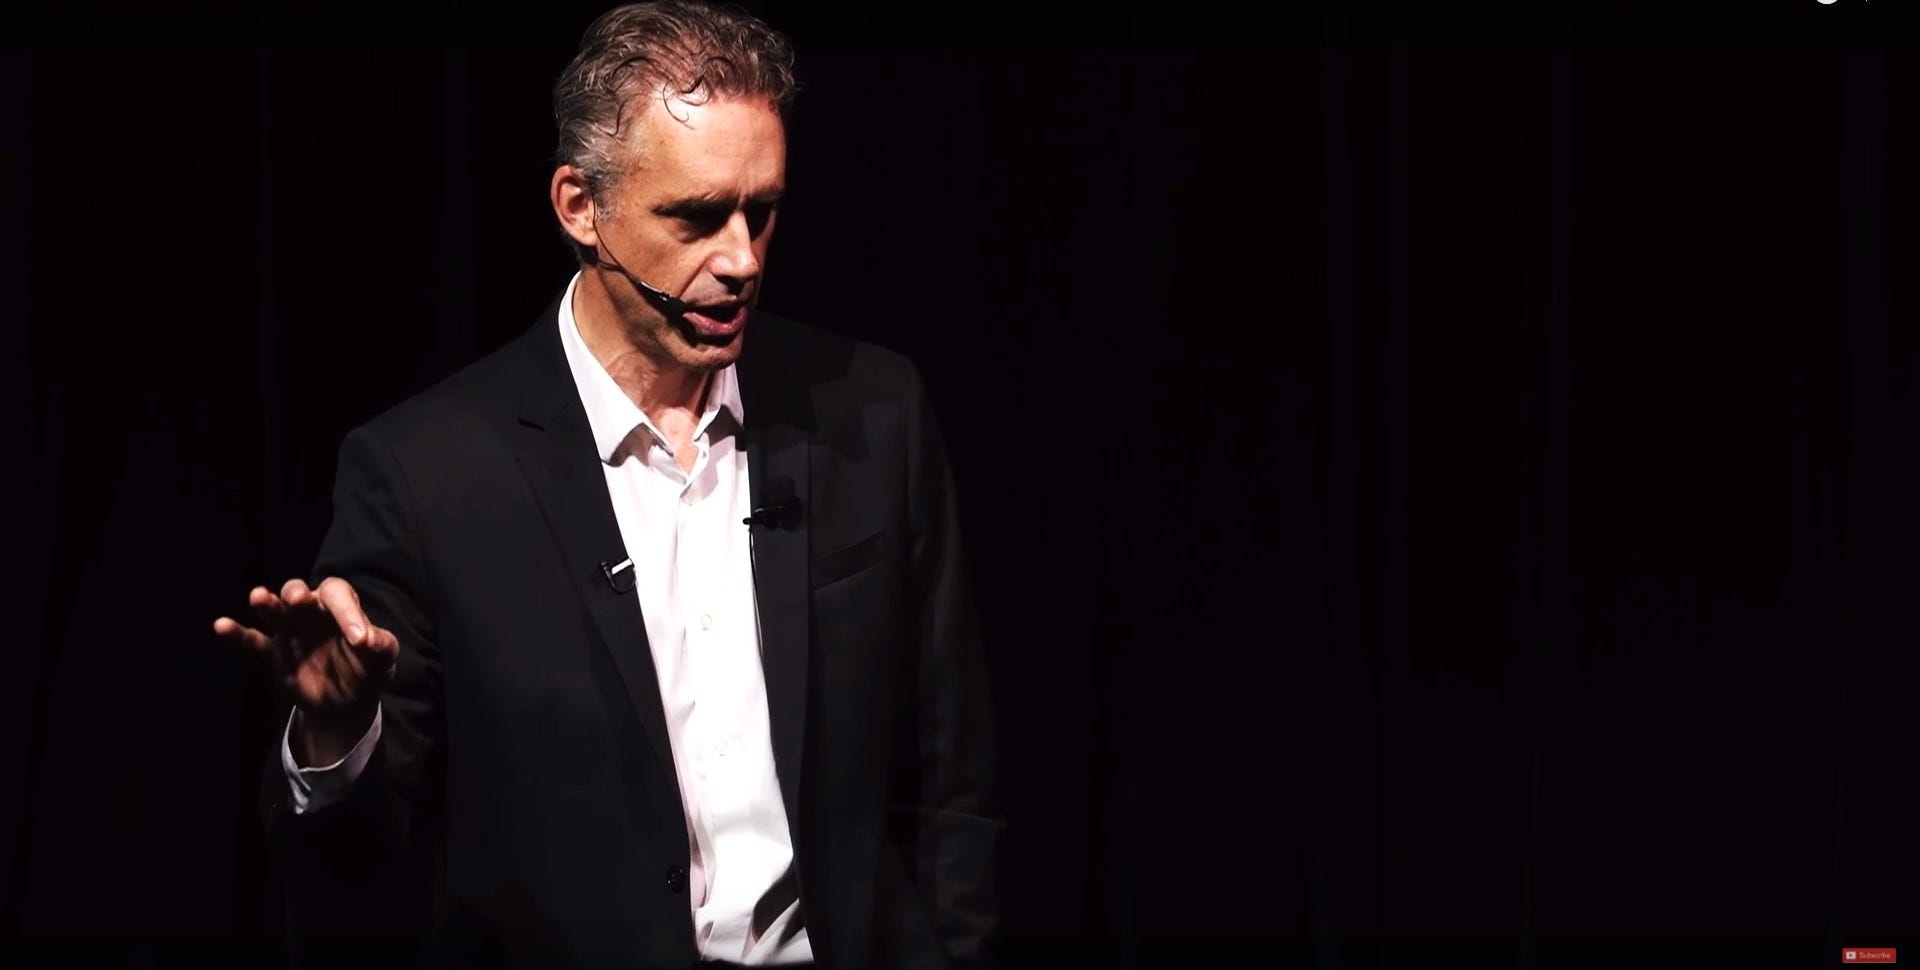 Jordan B. Peterson Is the Furthest Thing from the Alt-Right | by Dan  Sanchez | Medium